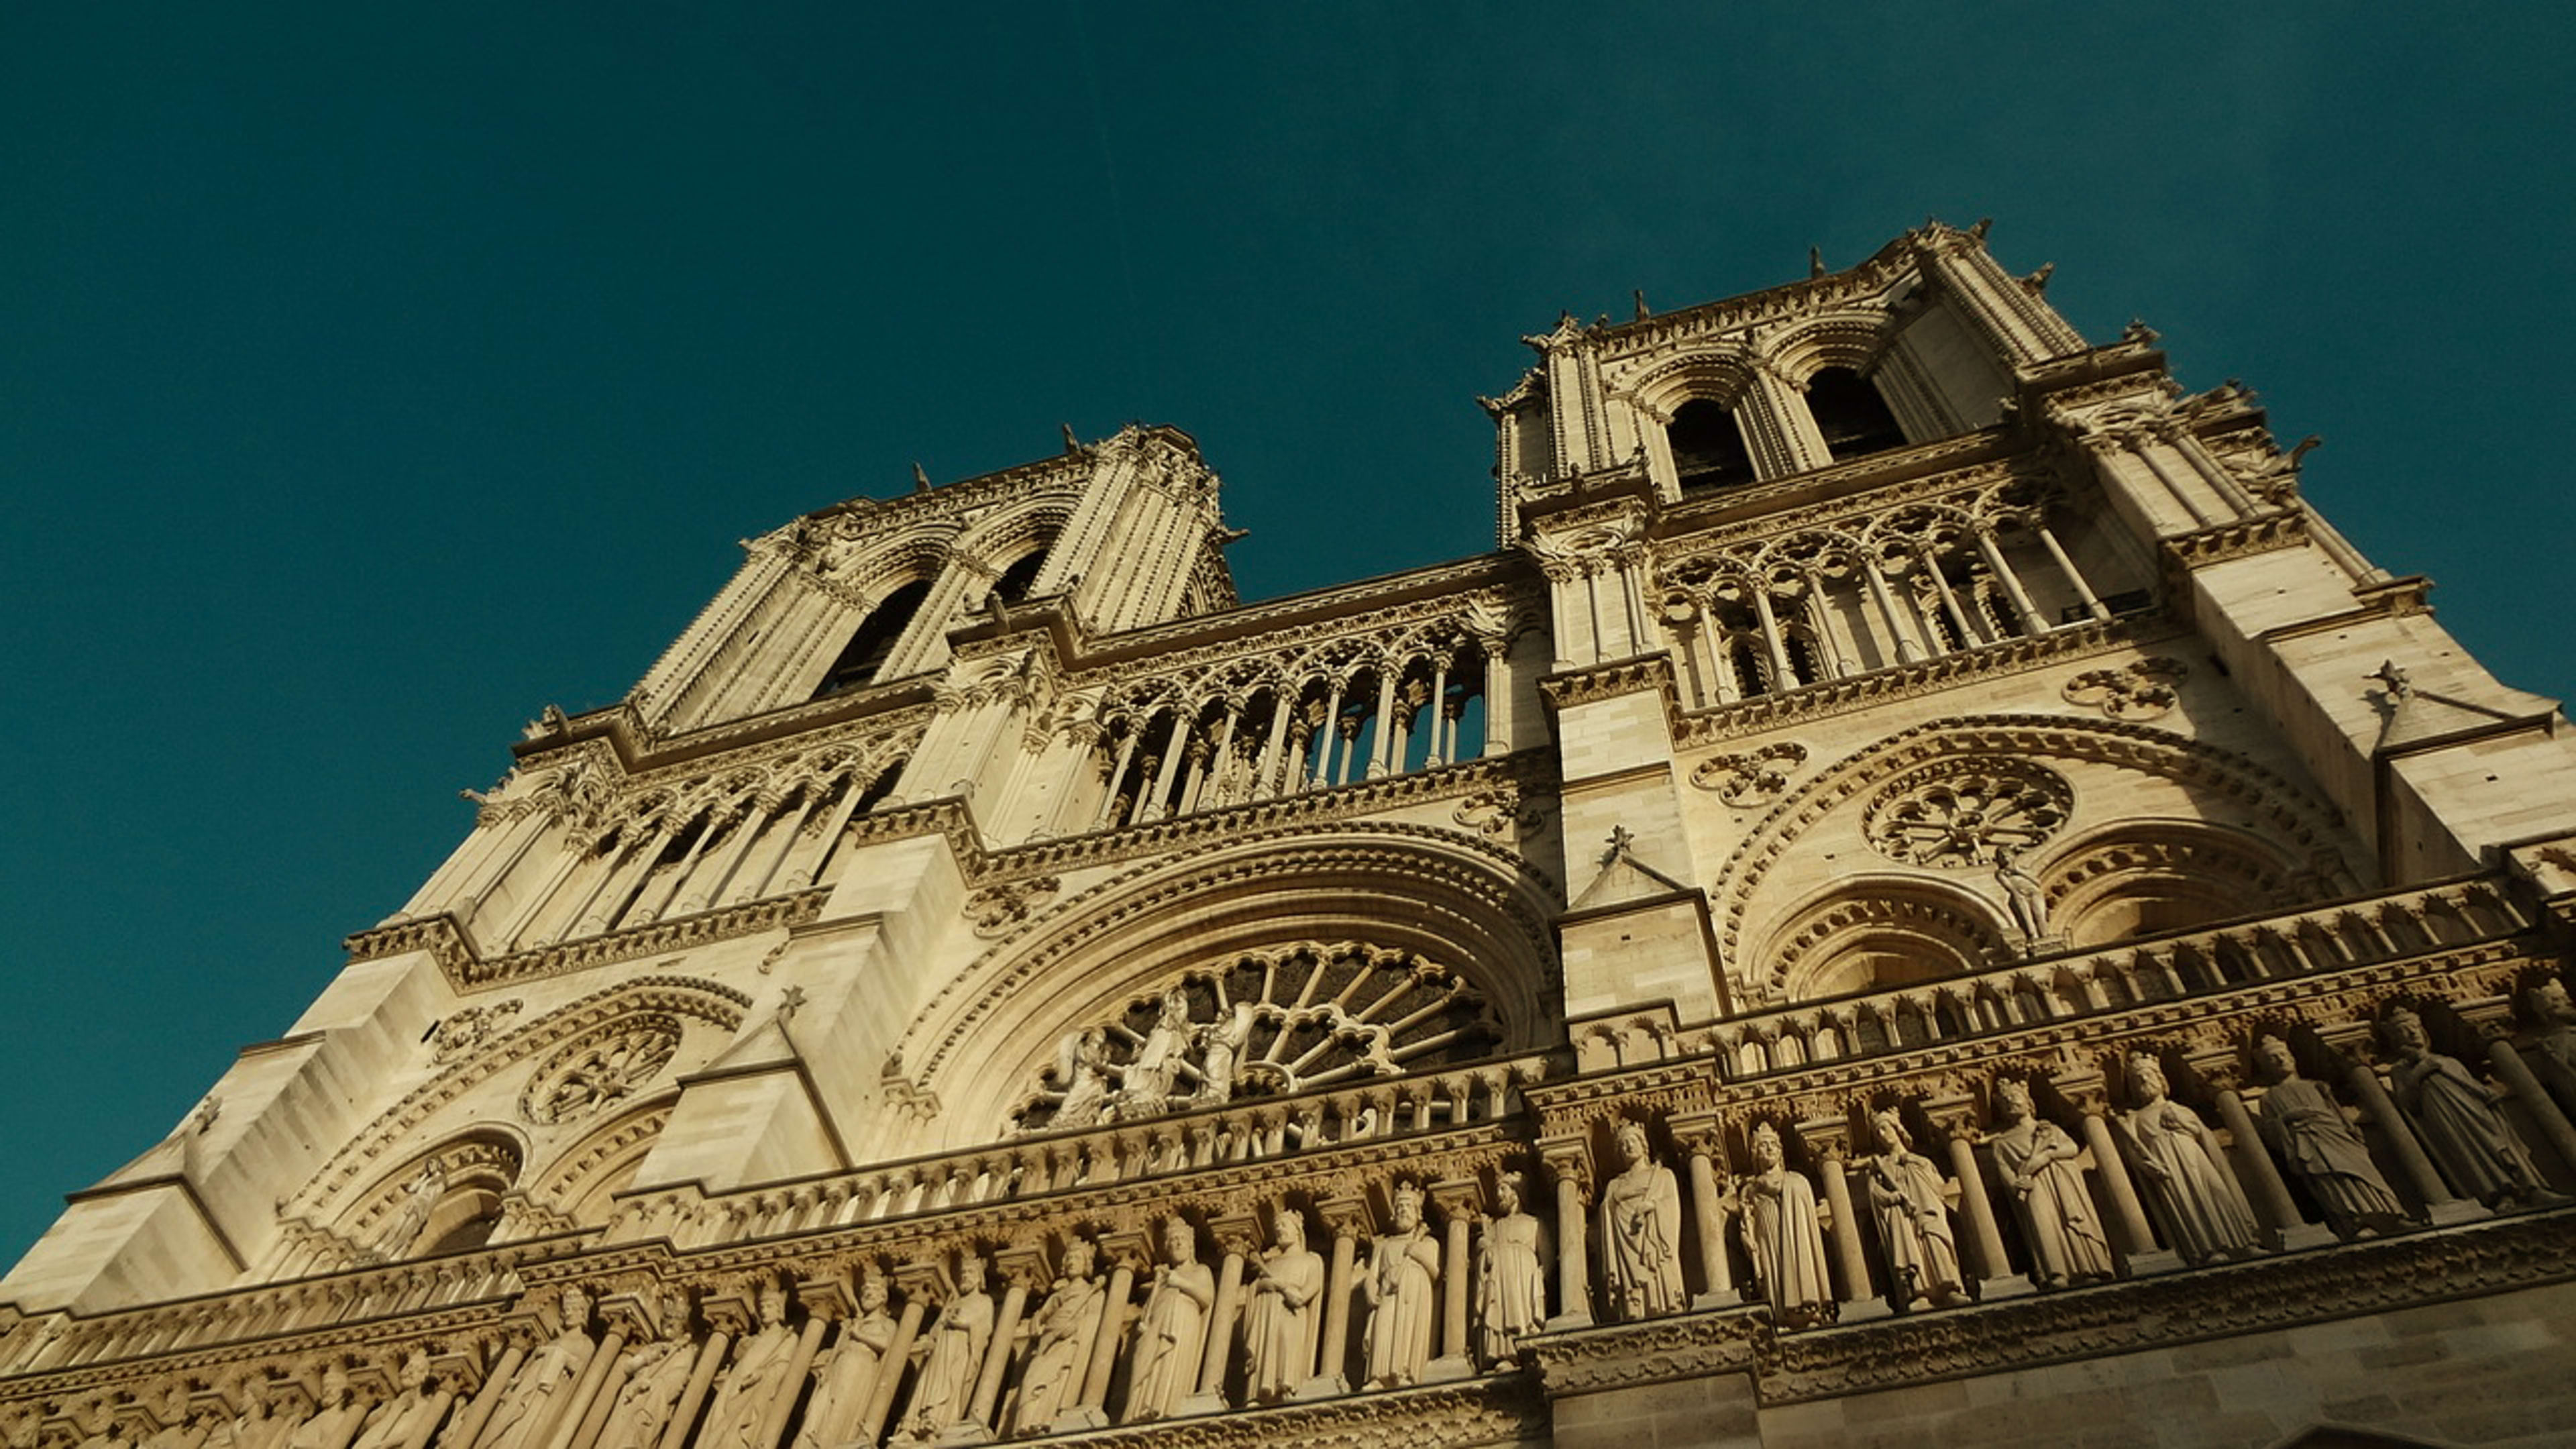 Maybe Notre Dame shouldn’t be rebuilt exactly as it was